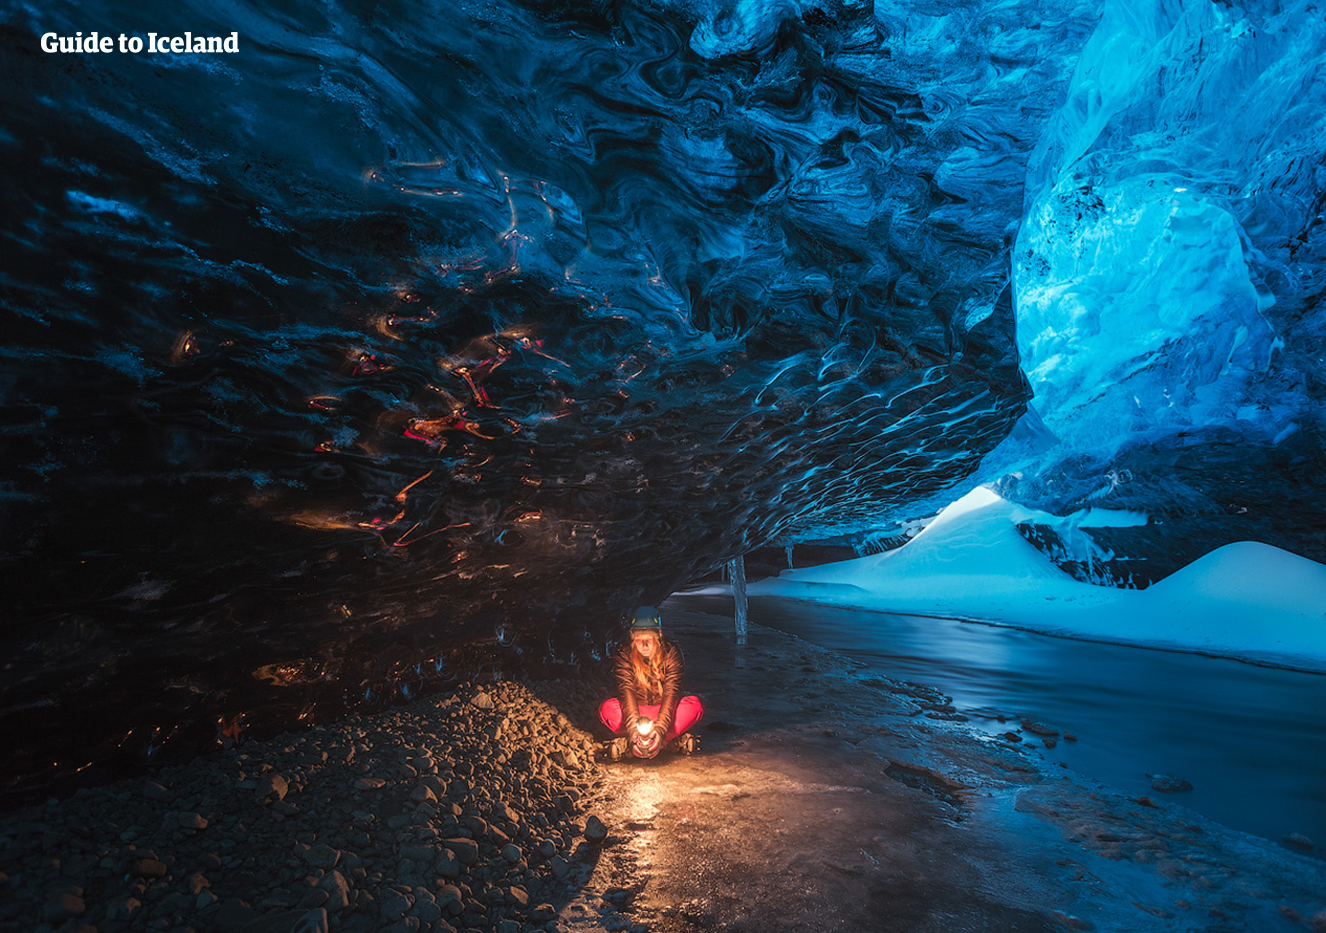 Exploring a natural ice cave is a unique experience only available between November and March.